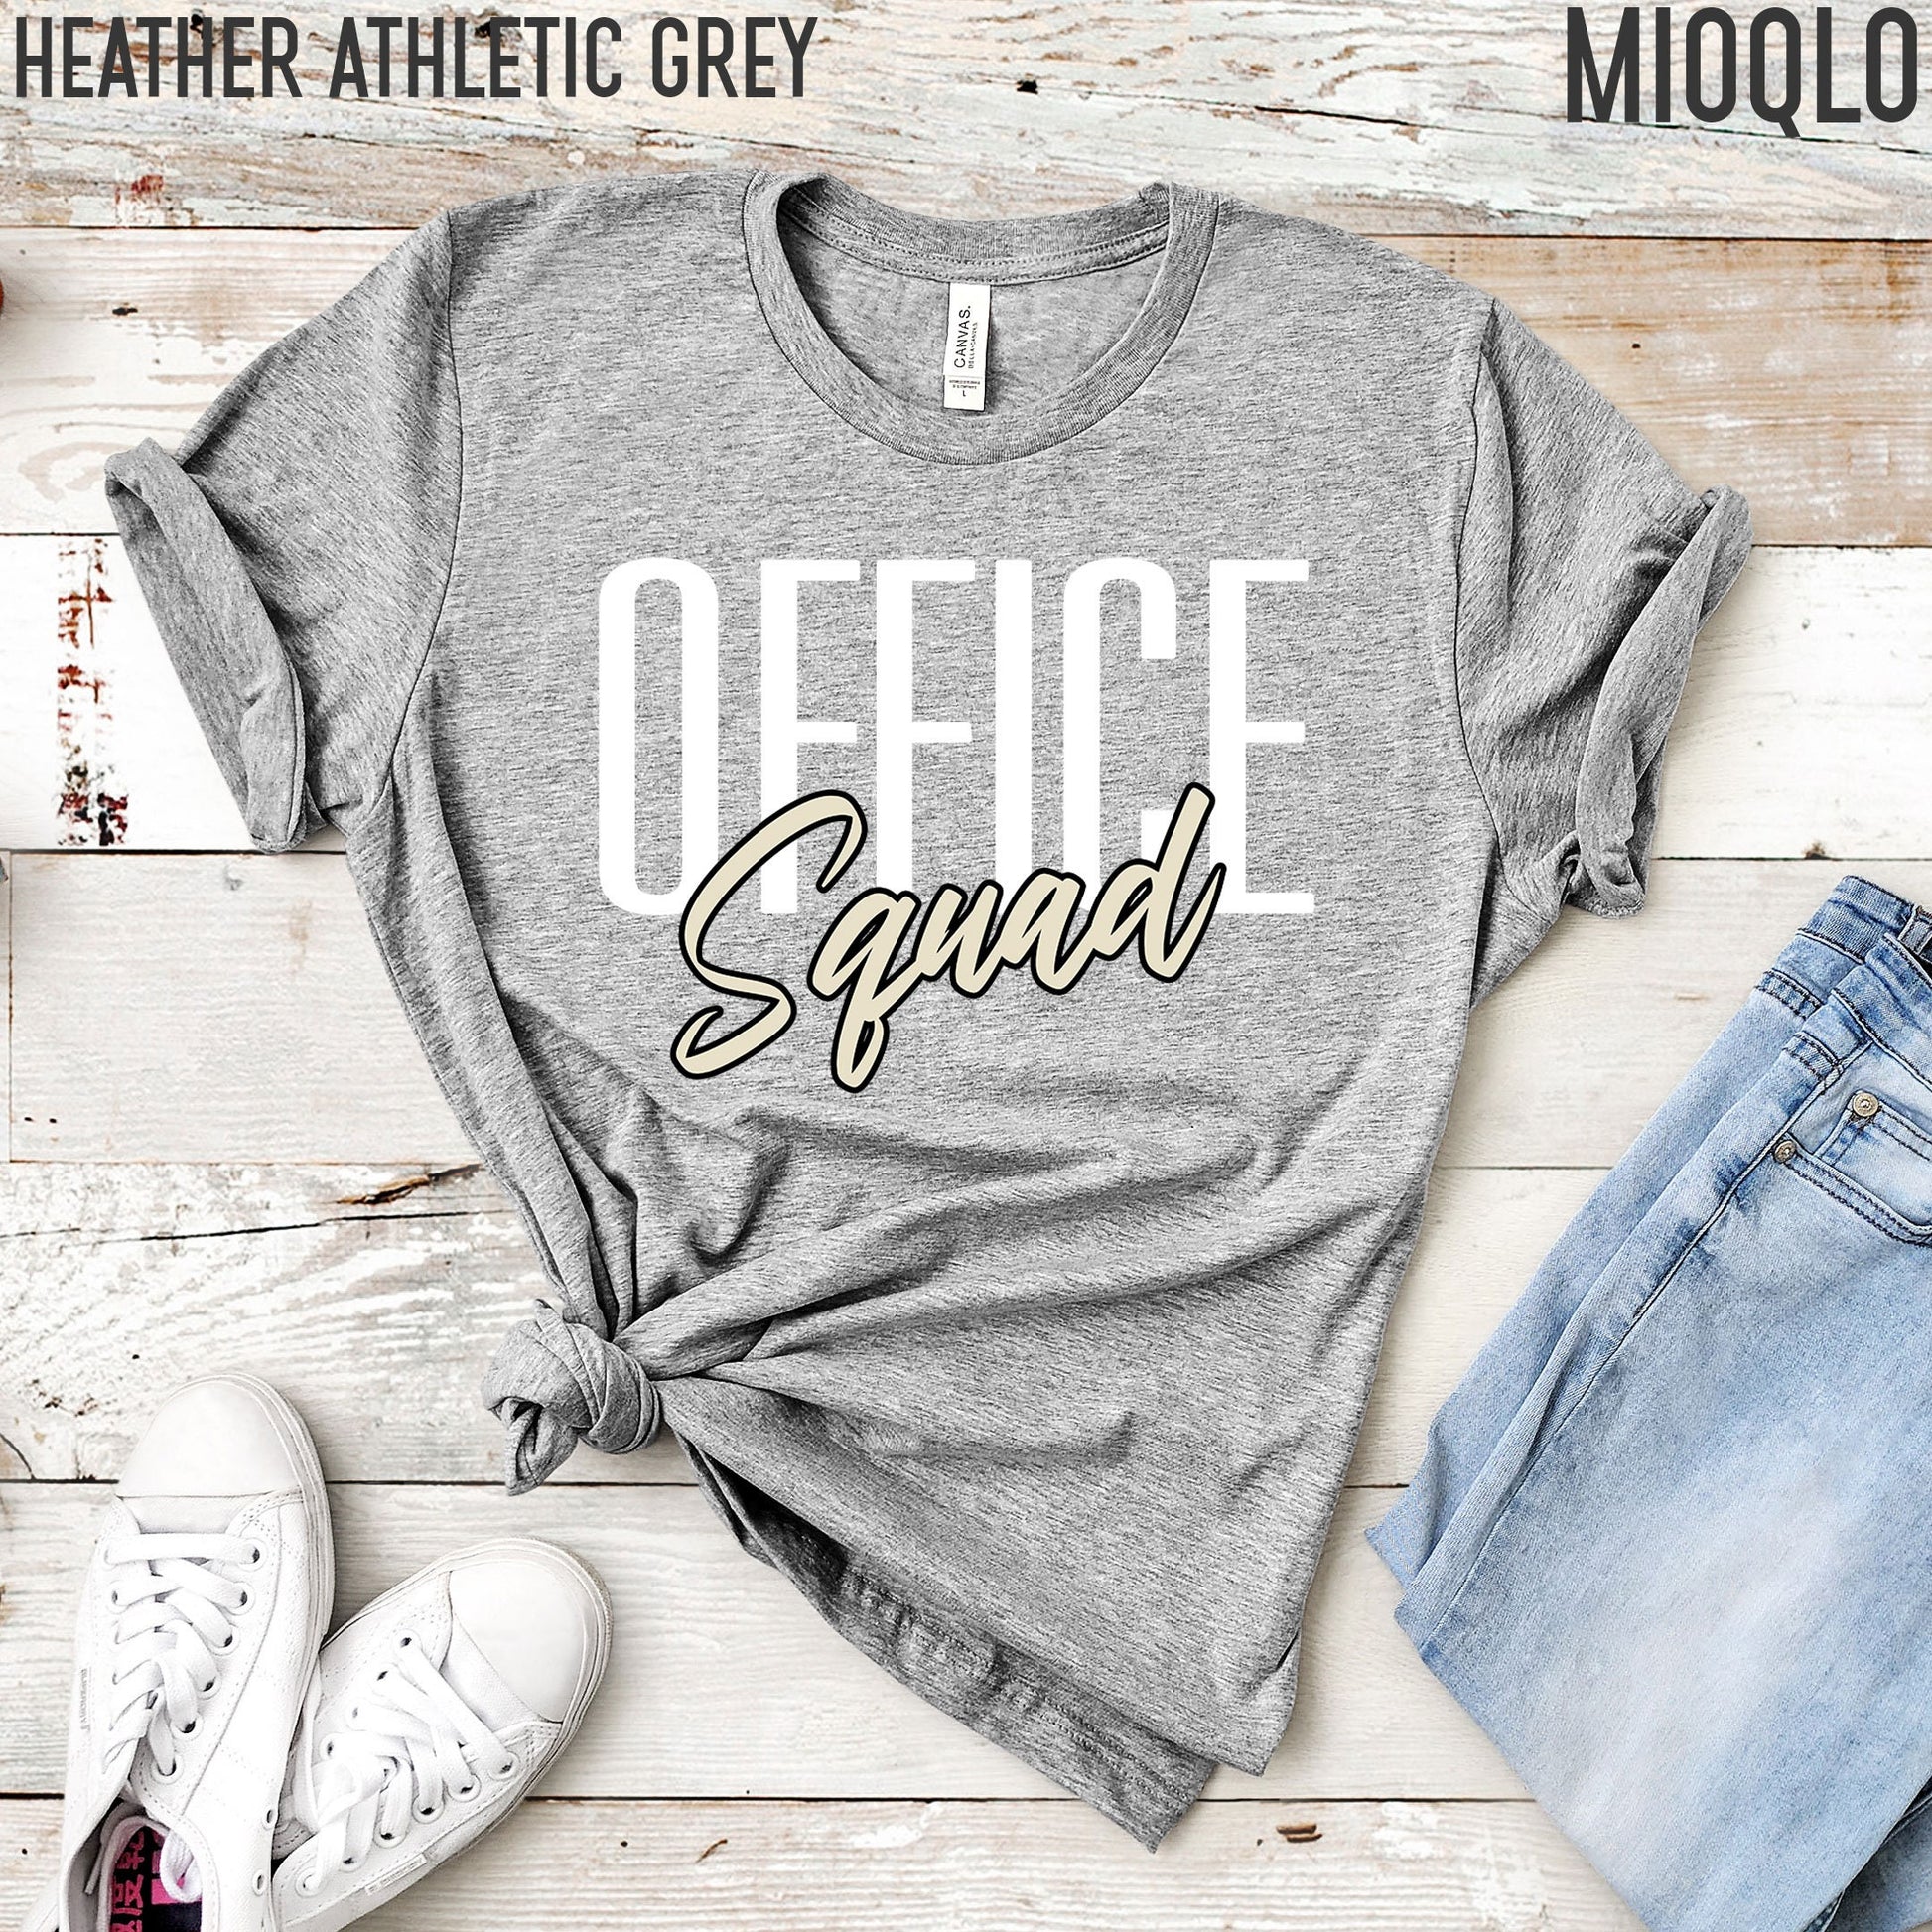 Office Squad T-shirt, Matching Office Staff Tee, Secretary Staff Admin Administrative Tank, Unisex Comfy Clothing For Summer, School Office